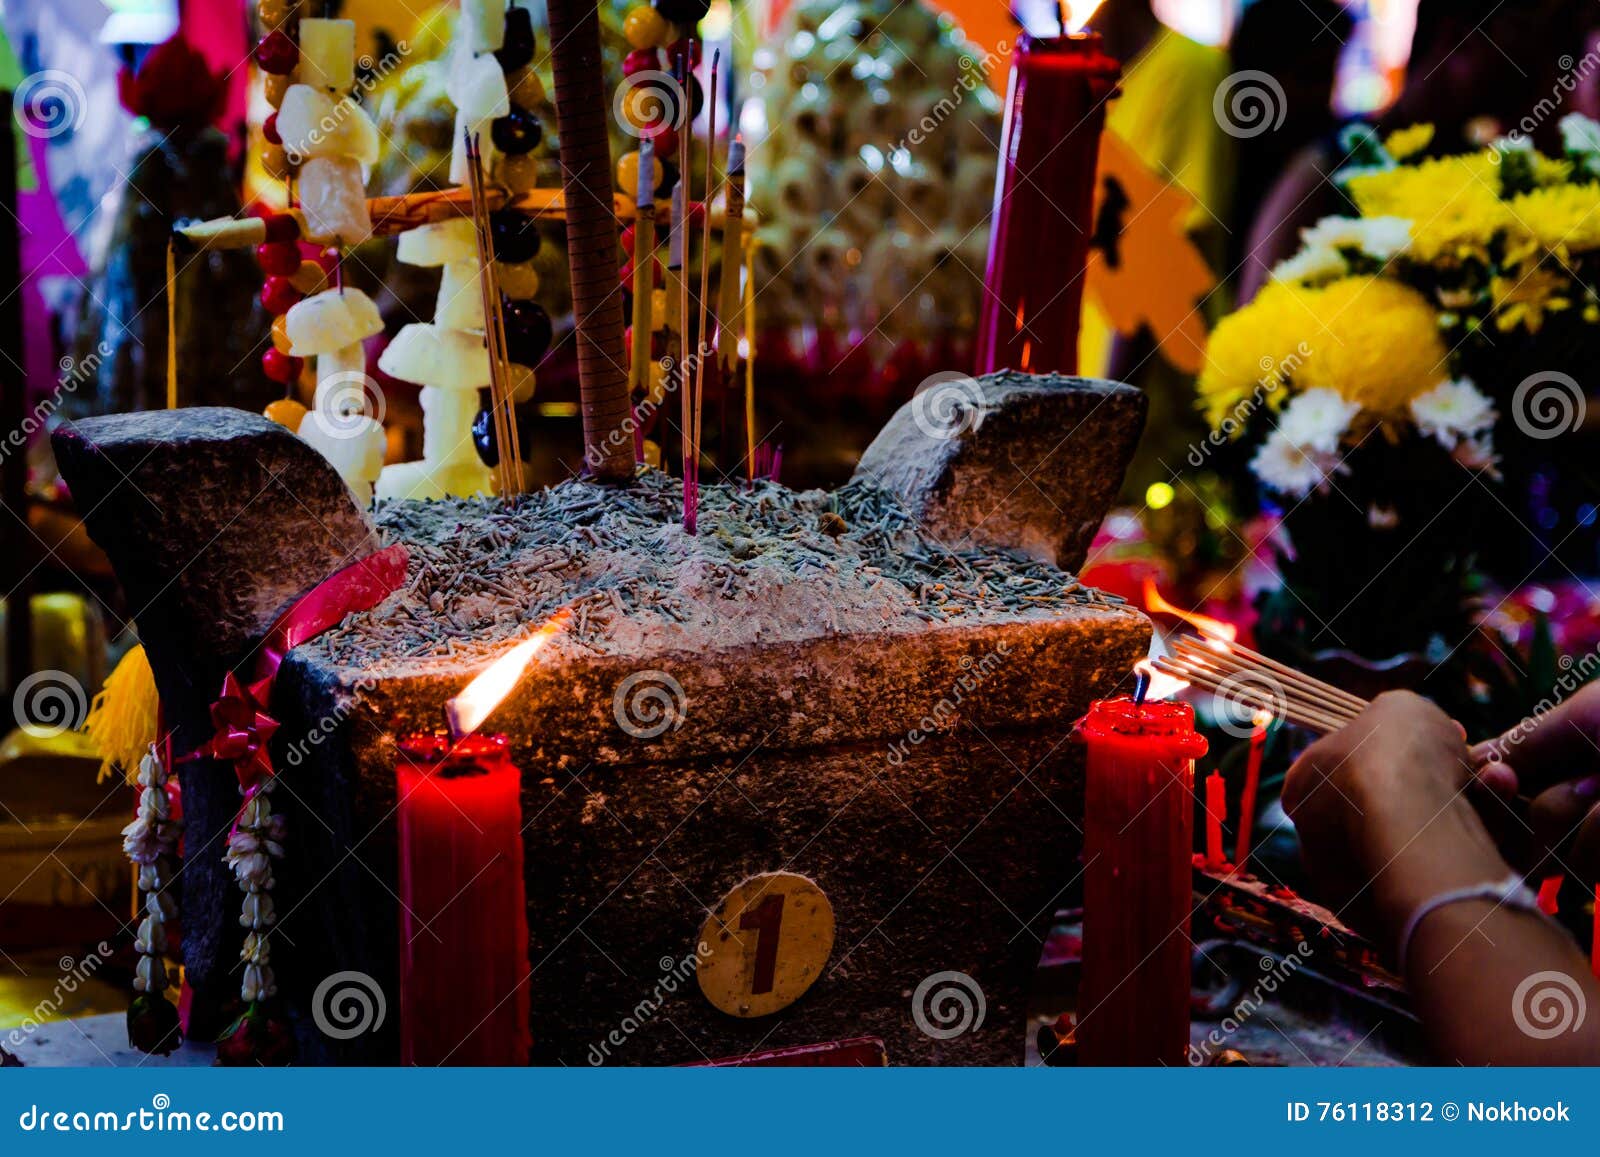 dowry ceremony at chinese hungry ghost festival (por tor) at old